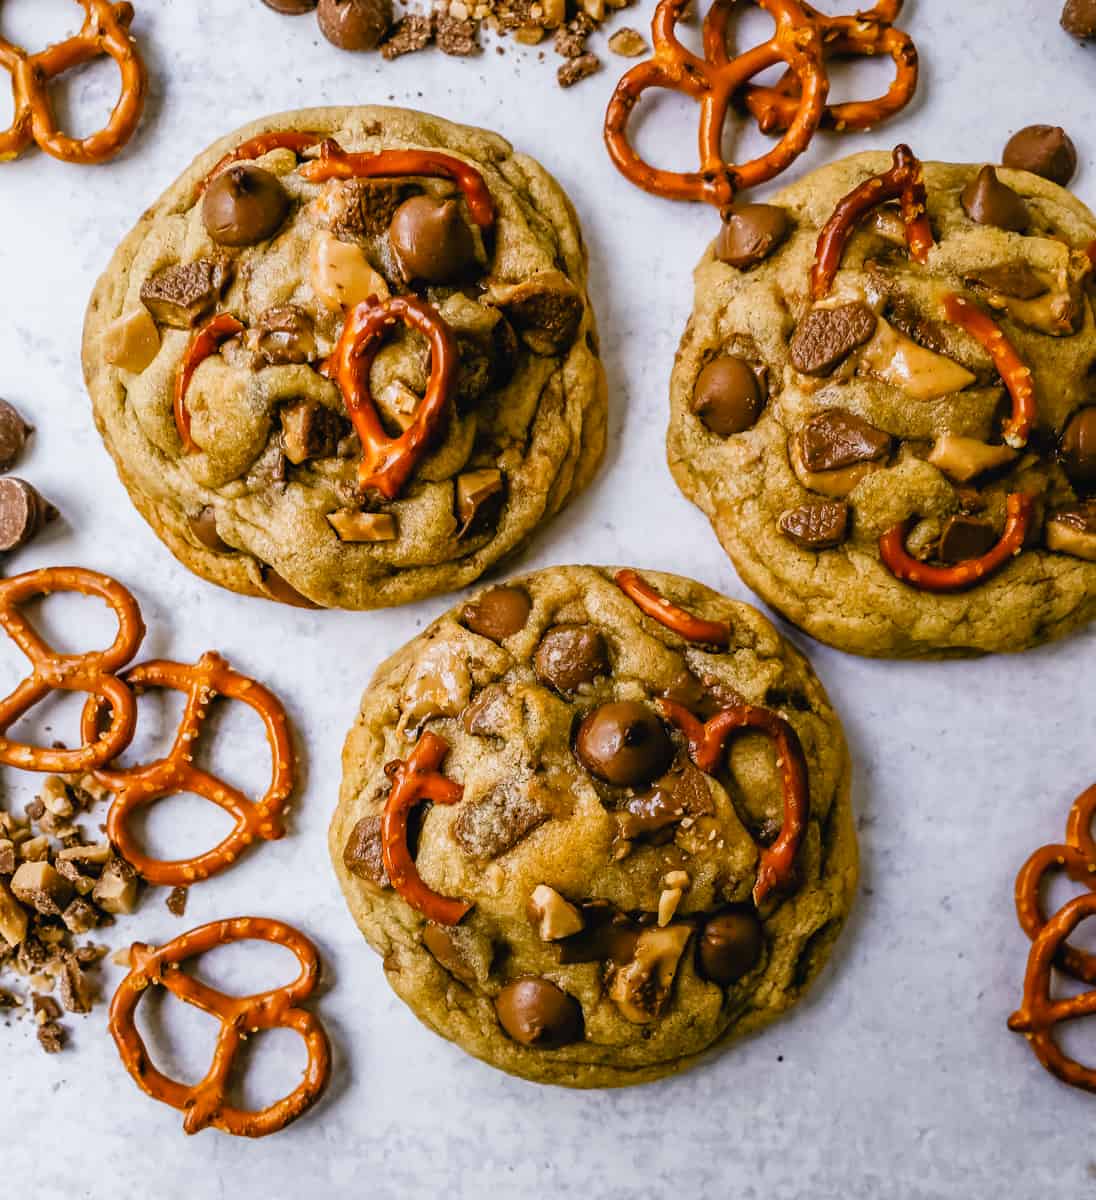 Toffee Chocolate Chip Pretzel Cookies are made with chocolate toffee chunks, salty pretzels, and milk chocolate chips. The perfect salty and sweet bakery cookie!